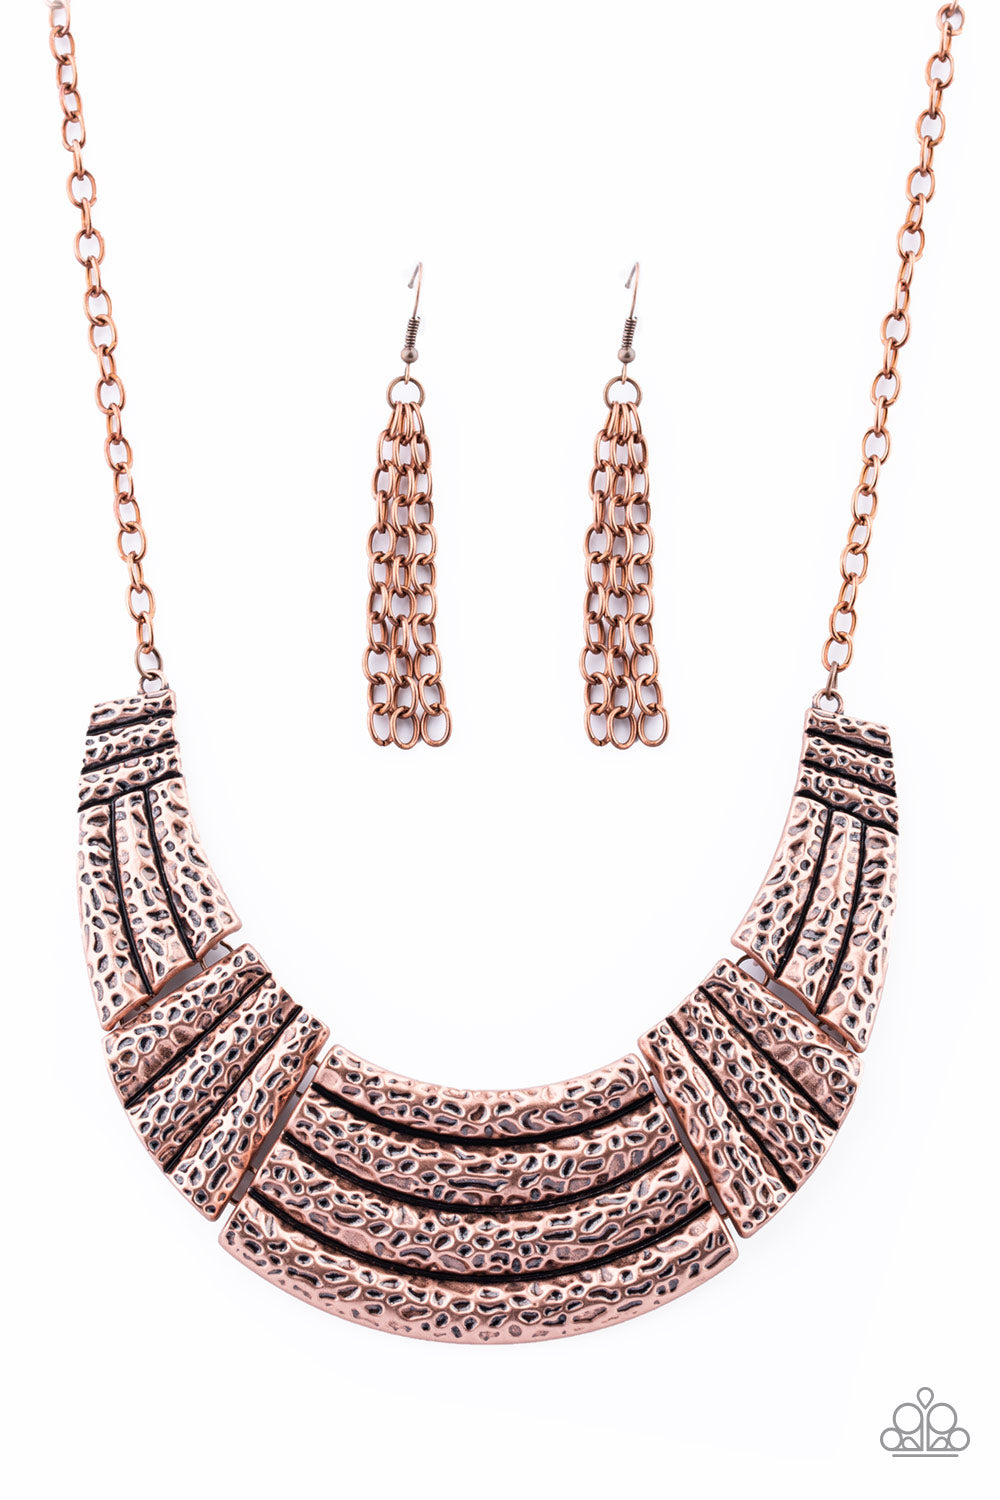 Ready To Pounce Necklace__Copper